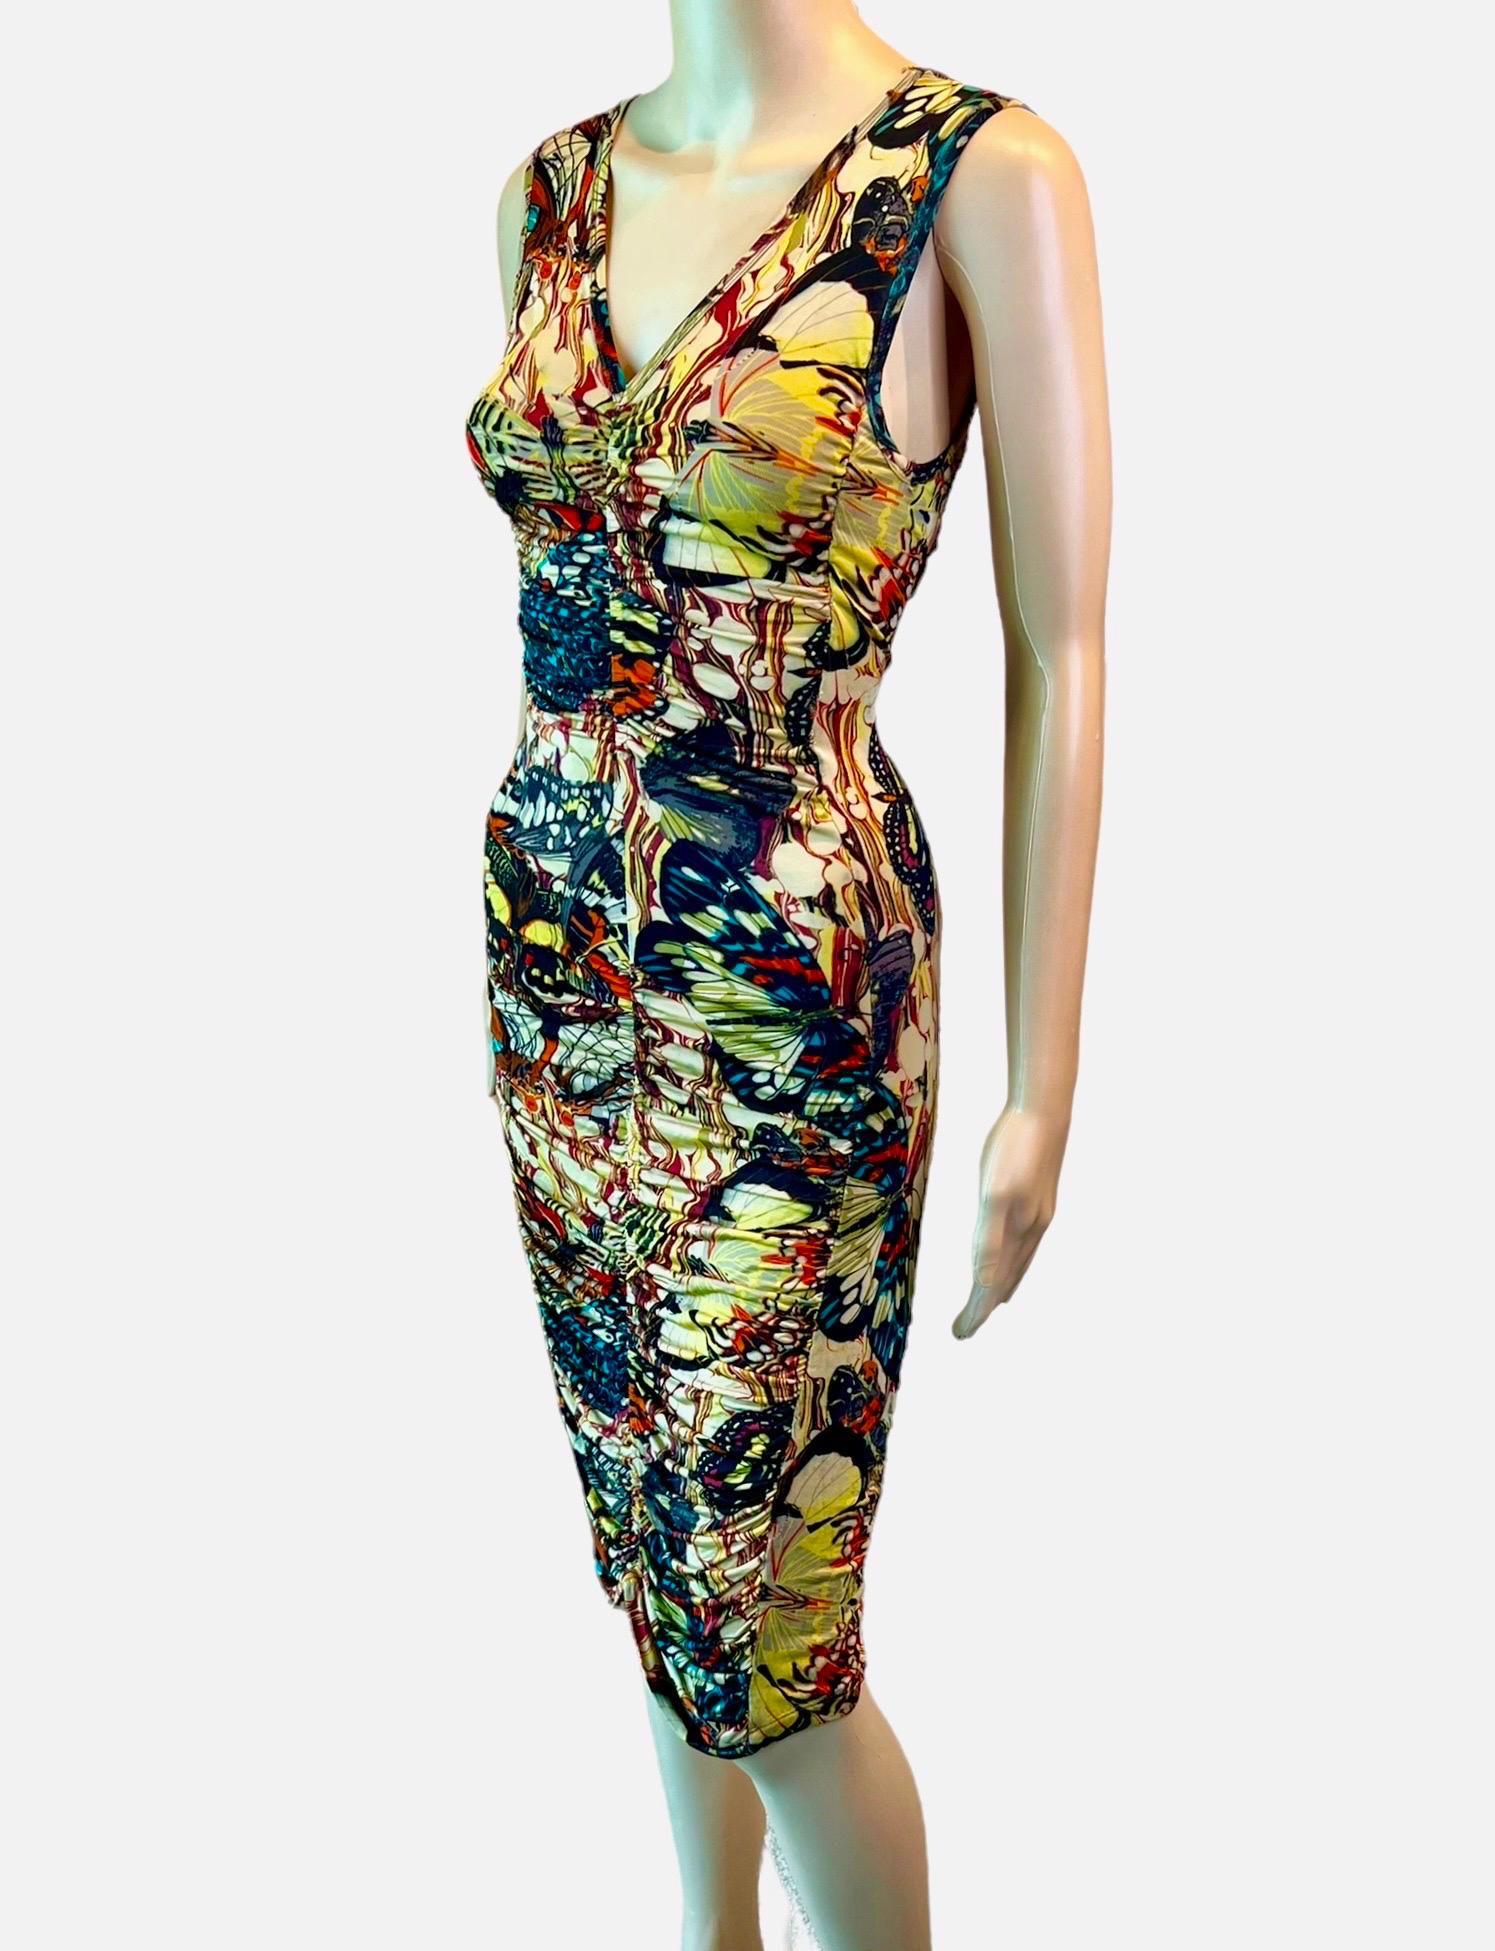 Jean Paul Gaultier Soleil S/S 2003 Butterfly Print Ruched Bodycon Mini Dress In Good Condition For Sale In Naples, FL